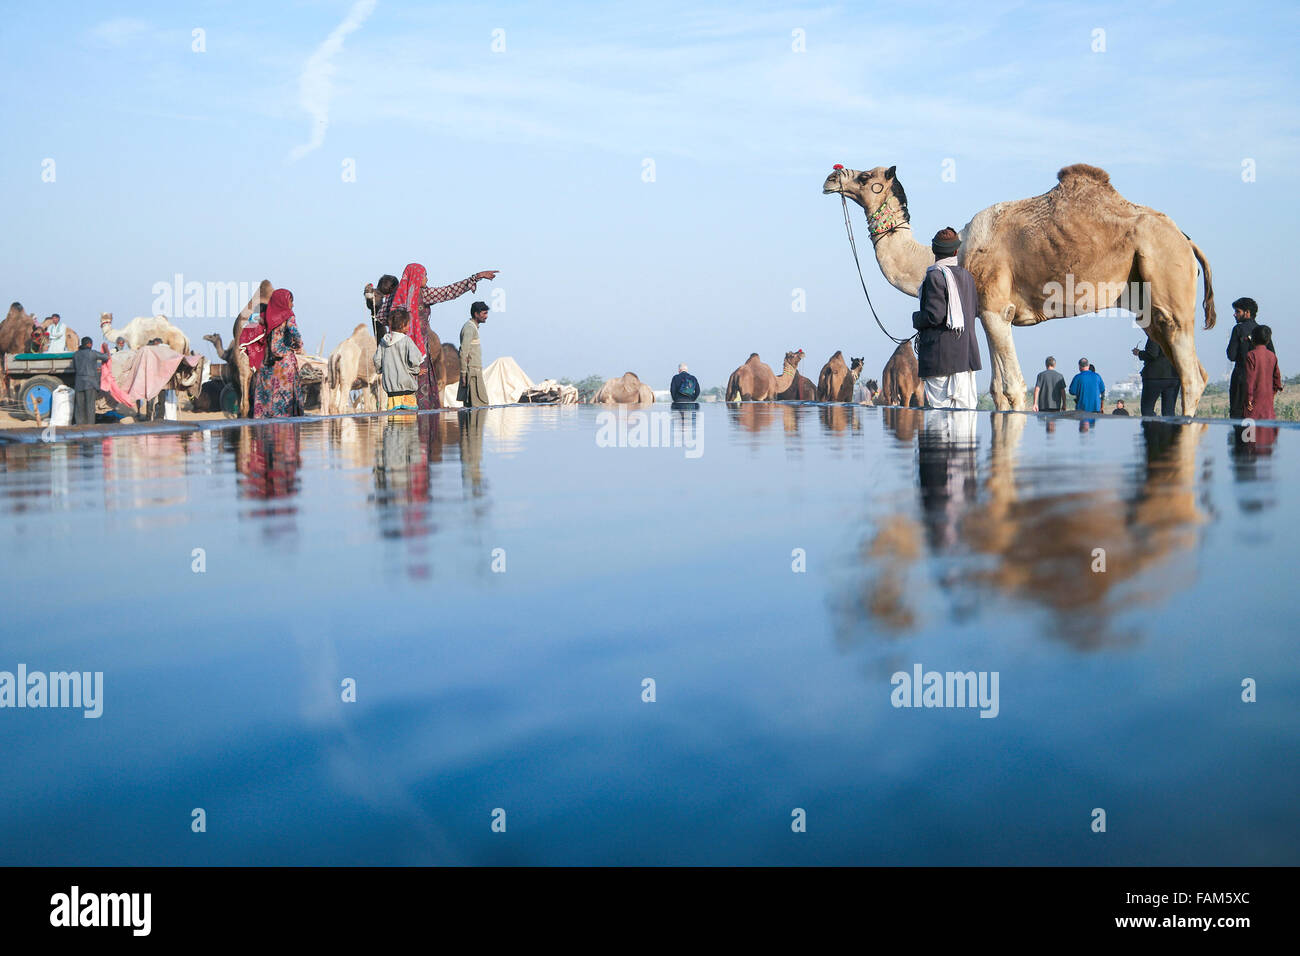 Camel herds or camel trader bring camels to the watering pool specially designed for them in Pushkar Stock Photo